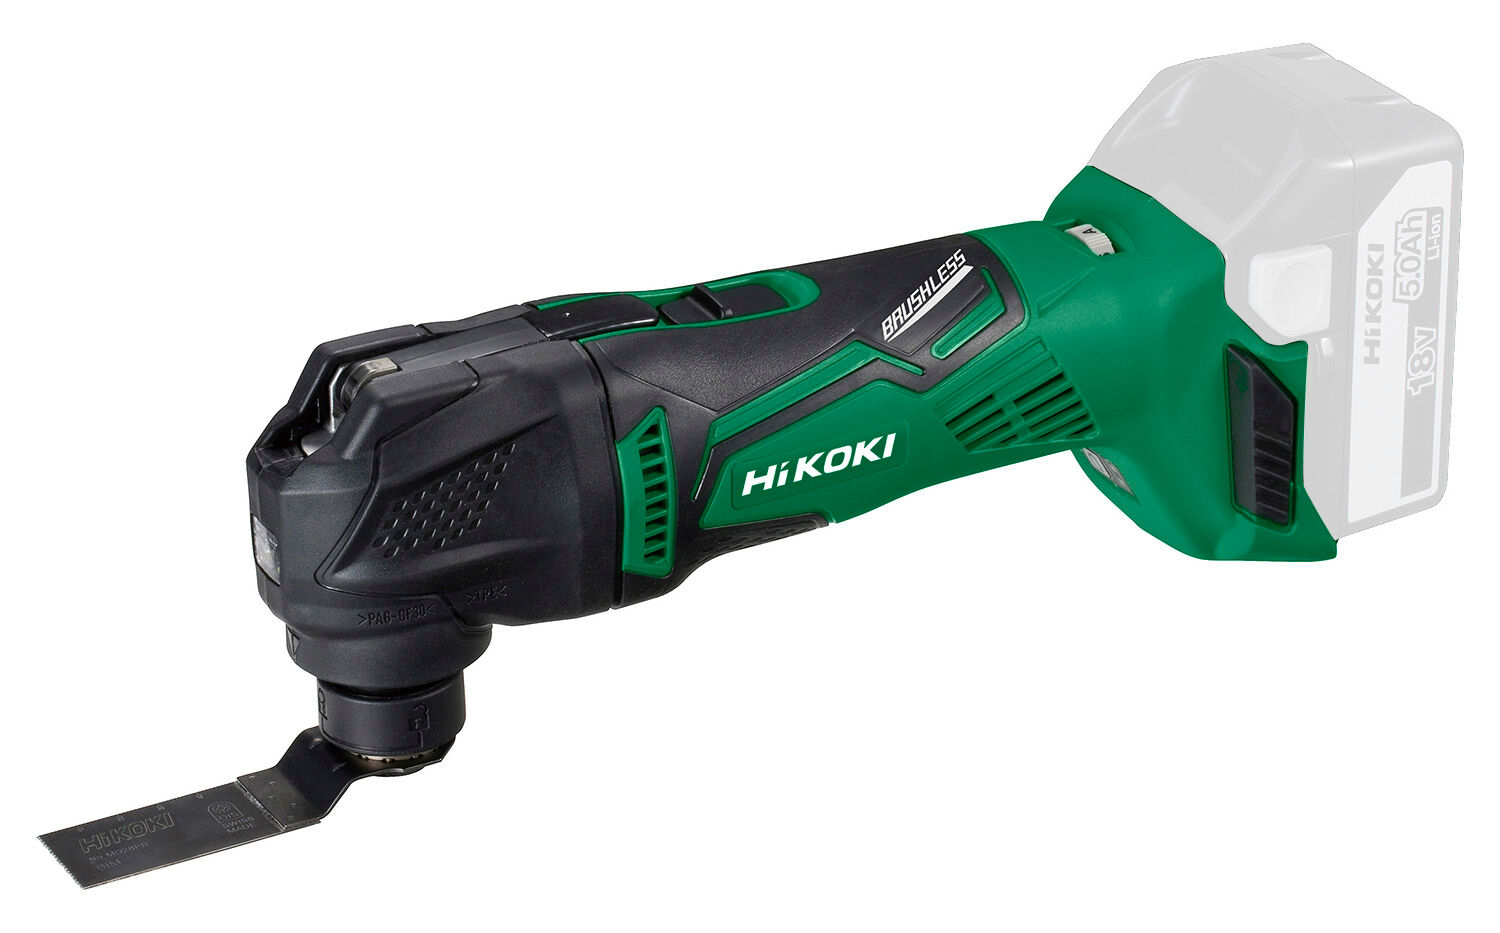 Bouwsales HiKOKI CV18DBL W2Z multi tool 18V ,brushless, exclusief accu's en lader, inclusief systainer HSC II